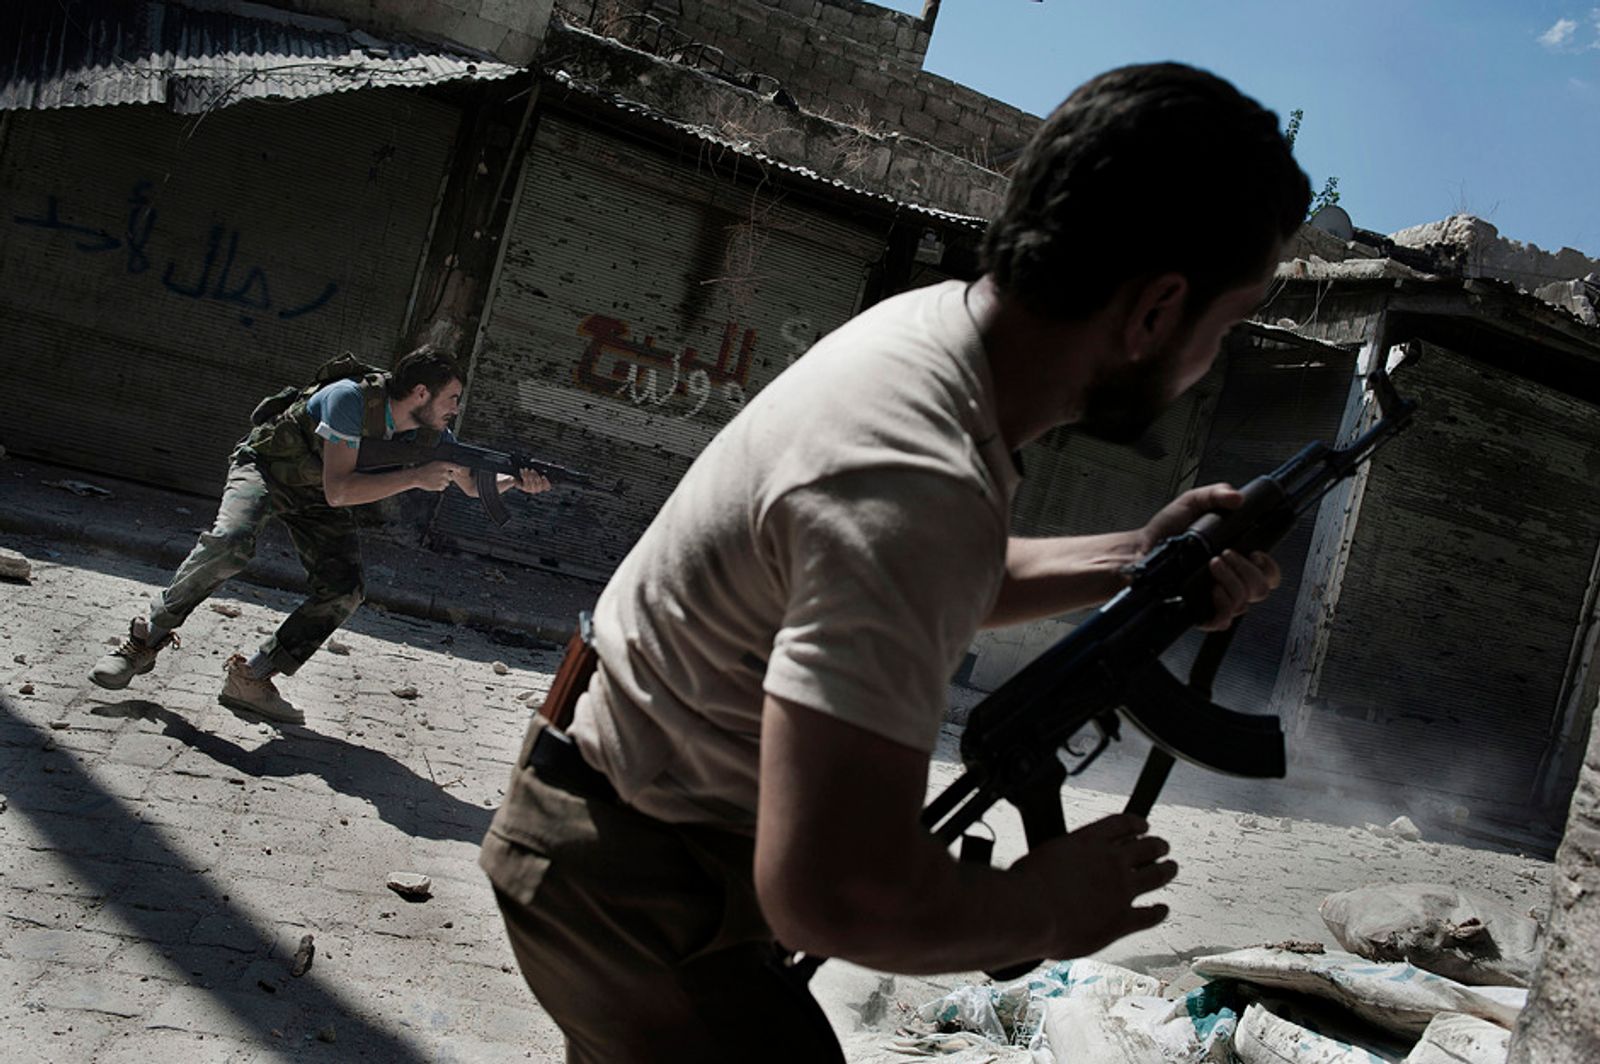 © Giulio Piscitelli - Image from the Syria: An orphan revolution photography project